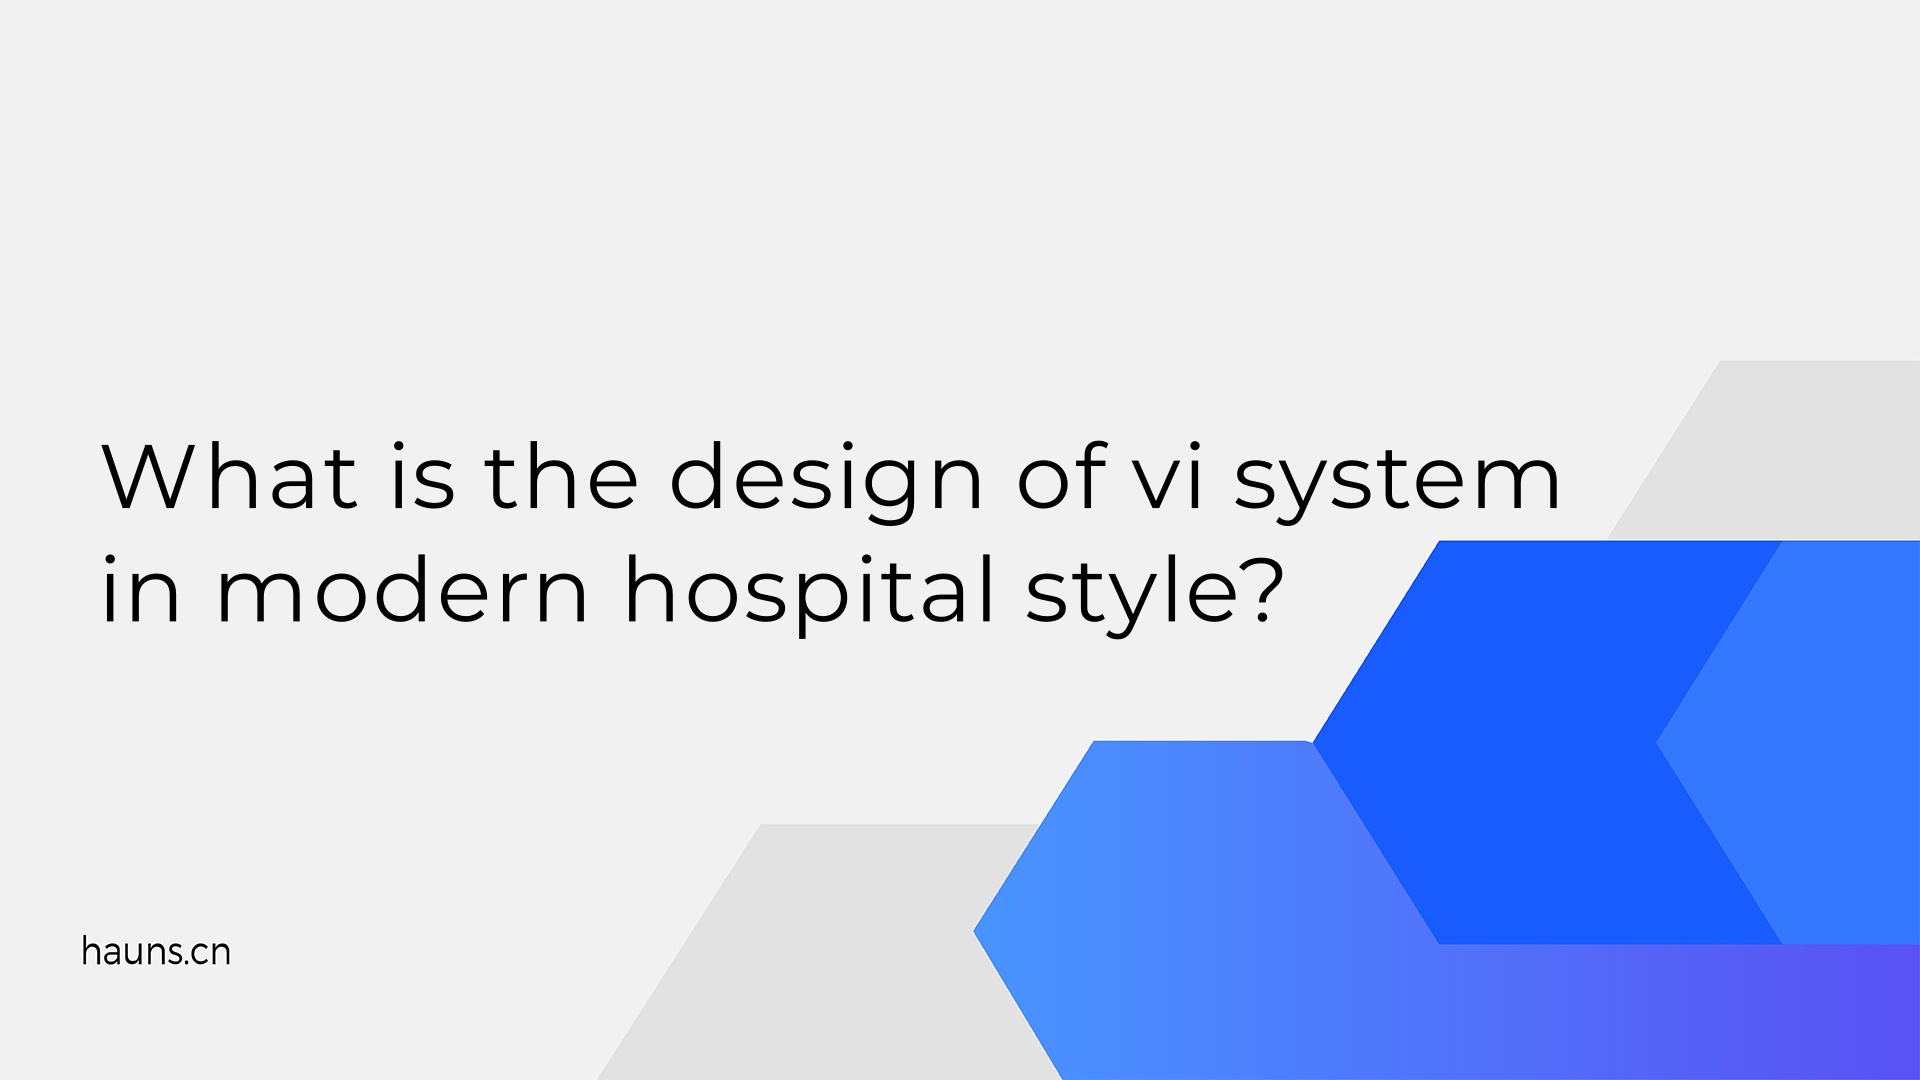 What is the design of vi system in modern hospital style?